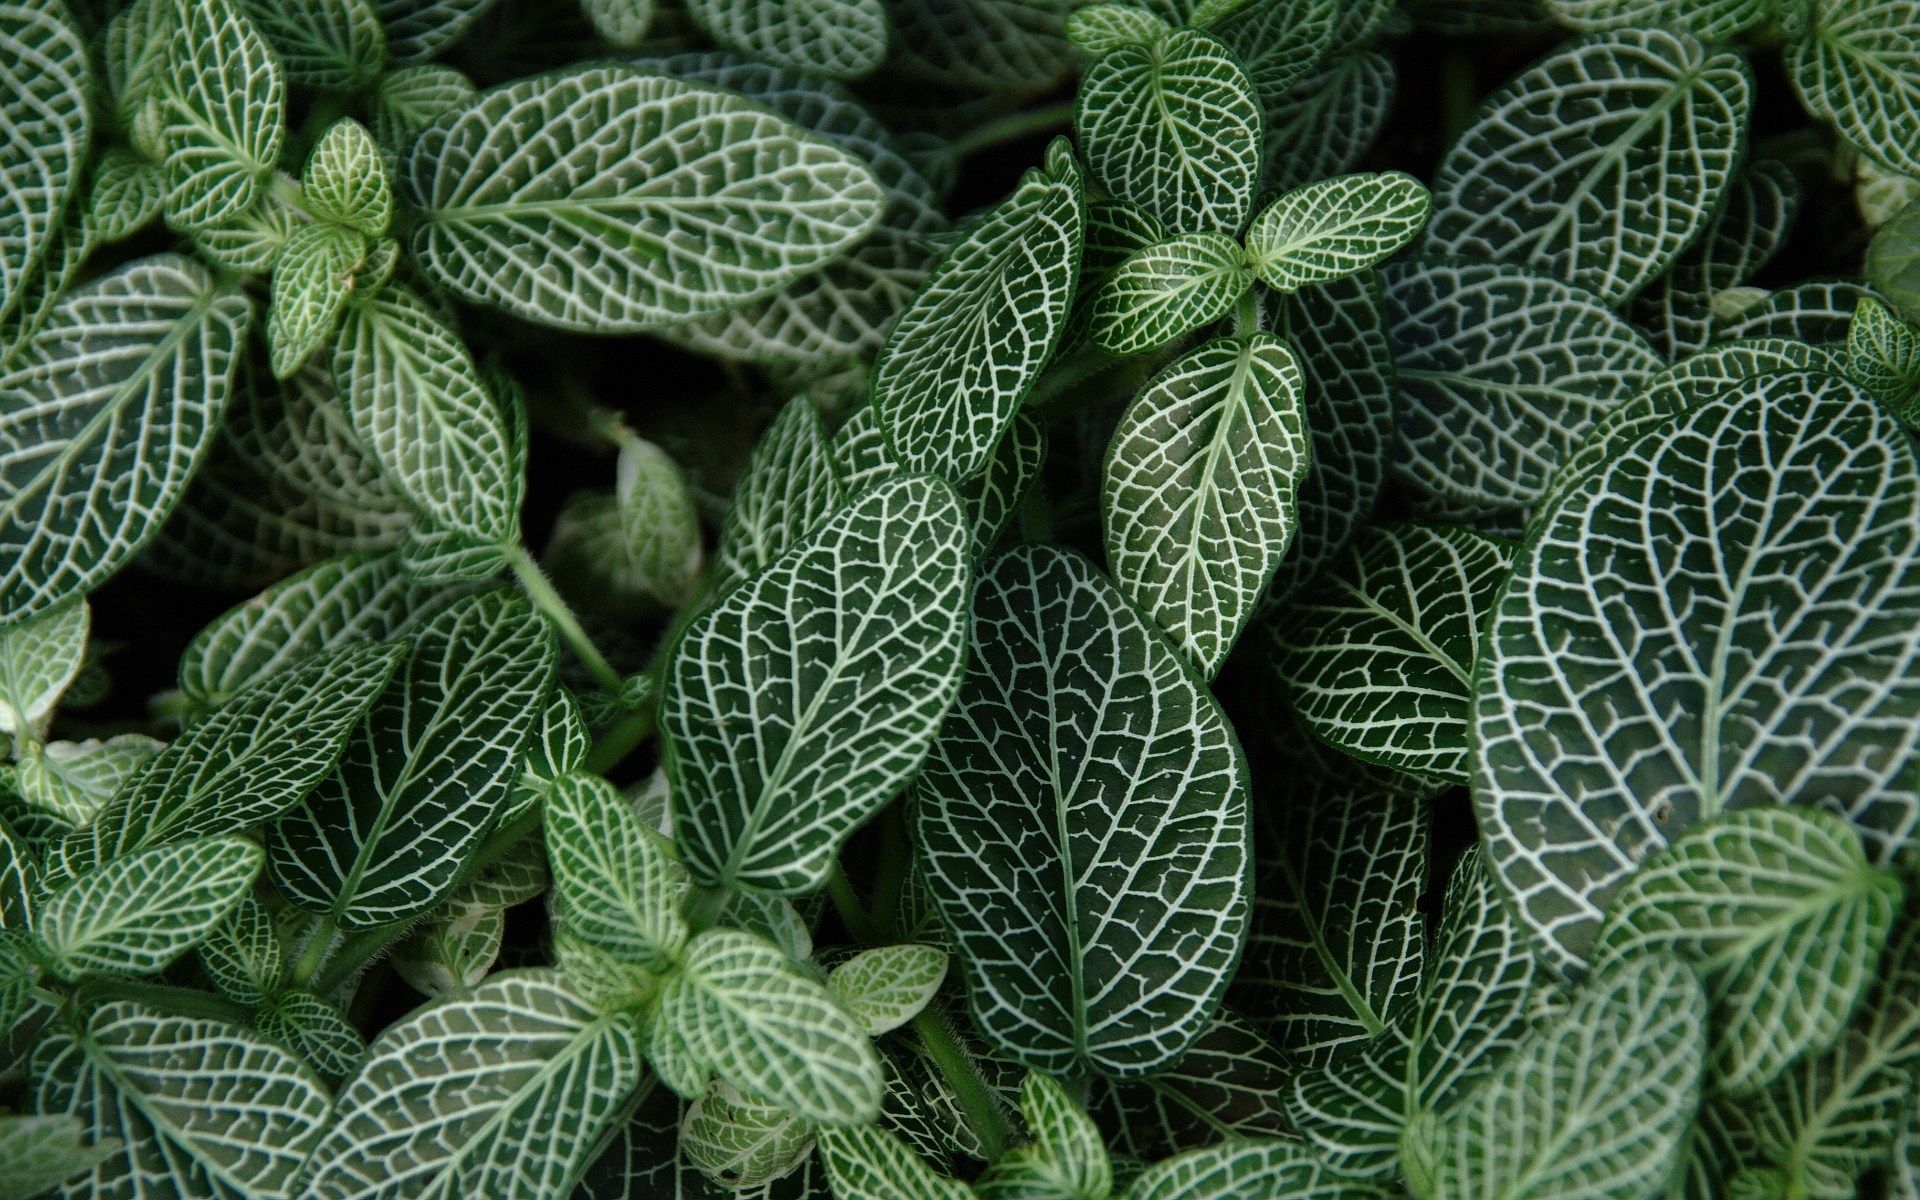 A close up of green and white leaves of a plant - Dark green